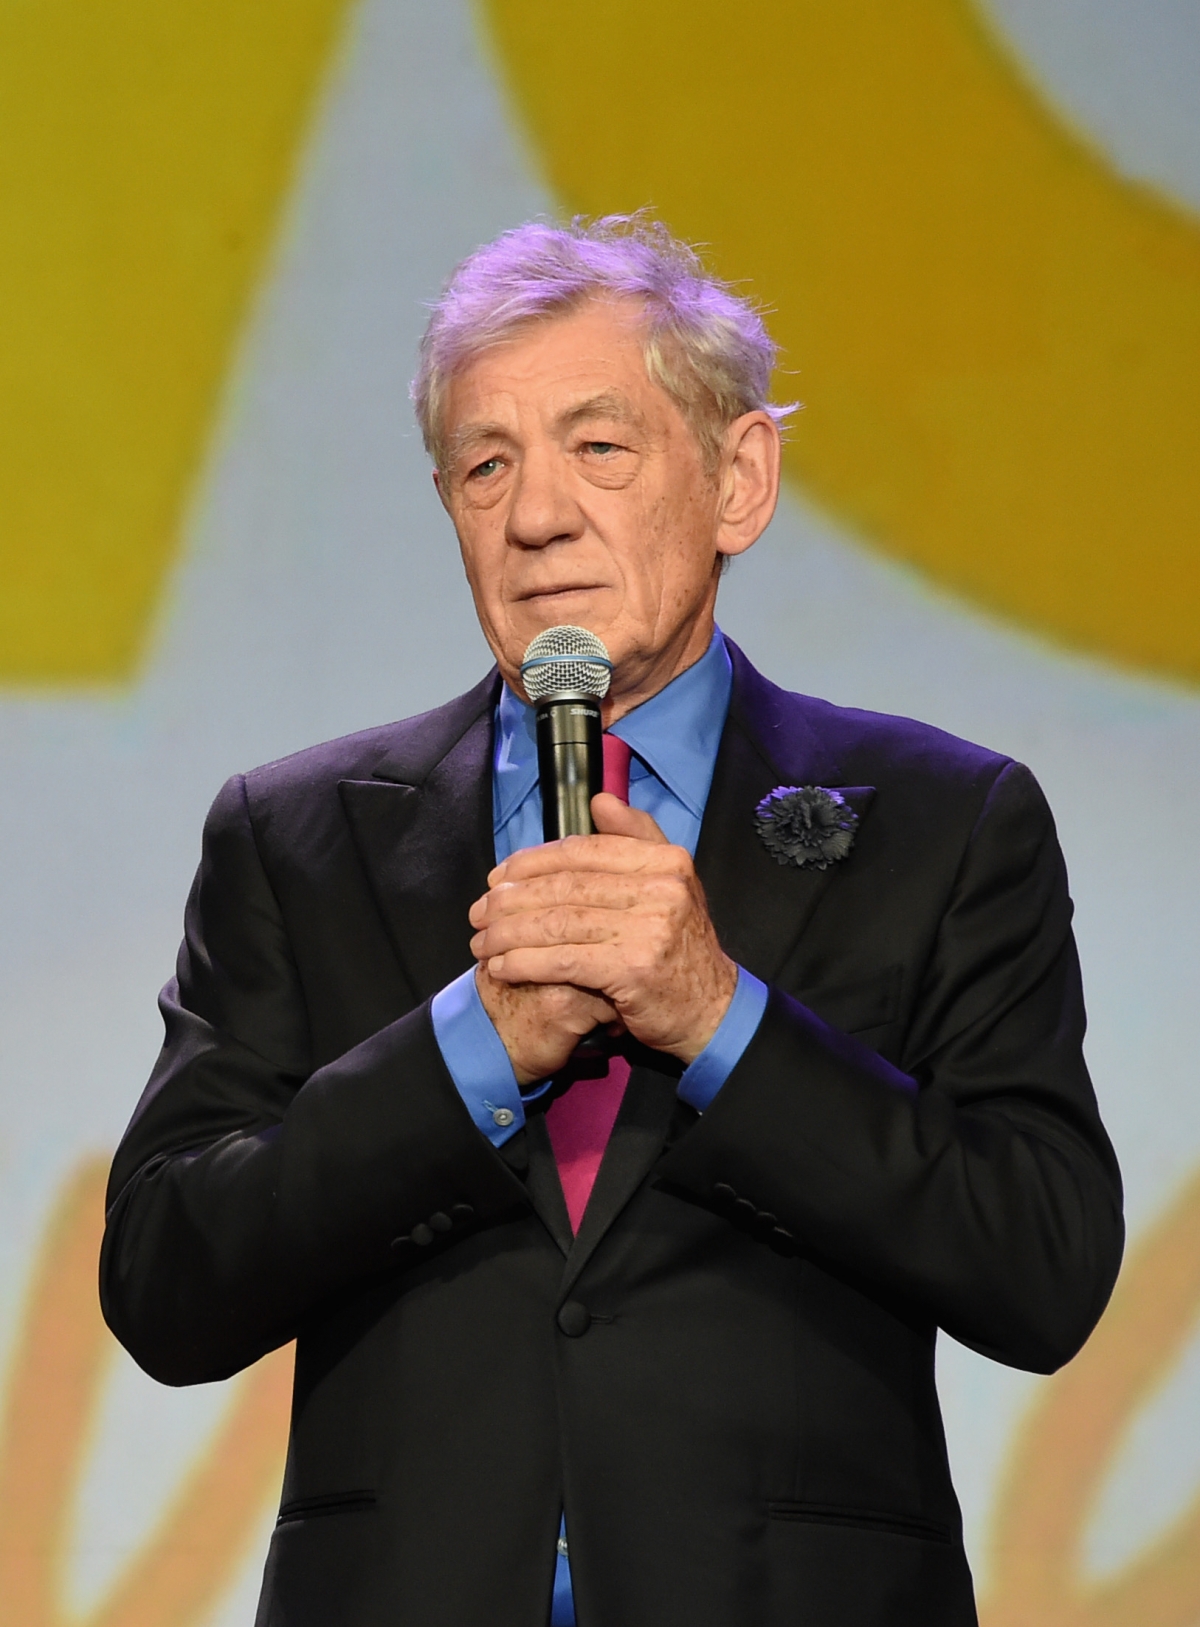 Sir Ian McKellen has backed the campaign